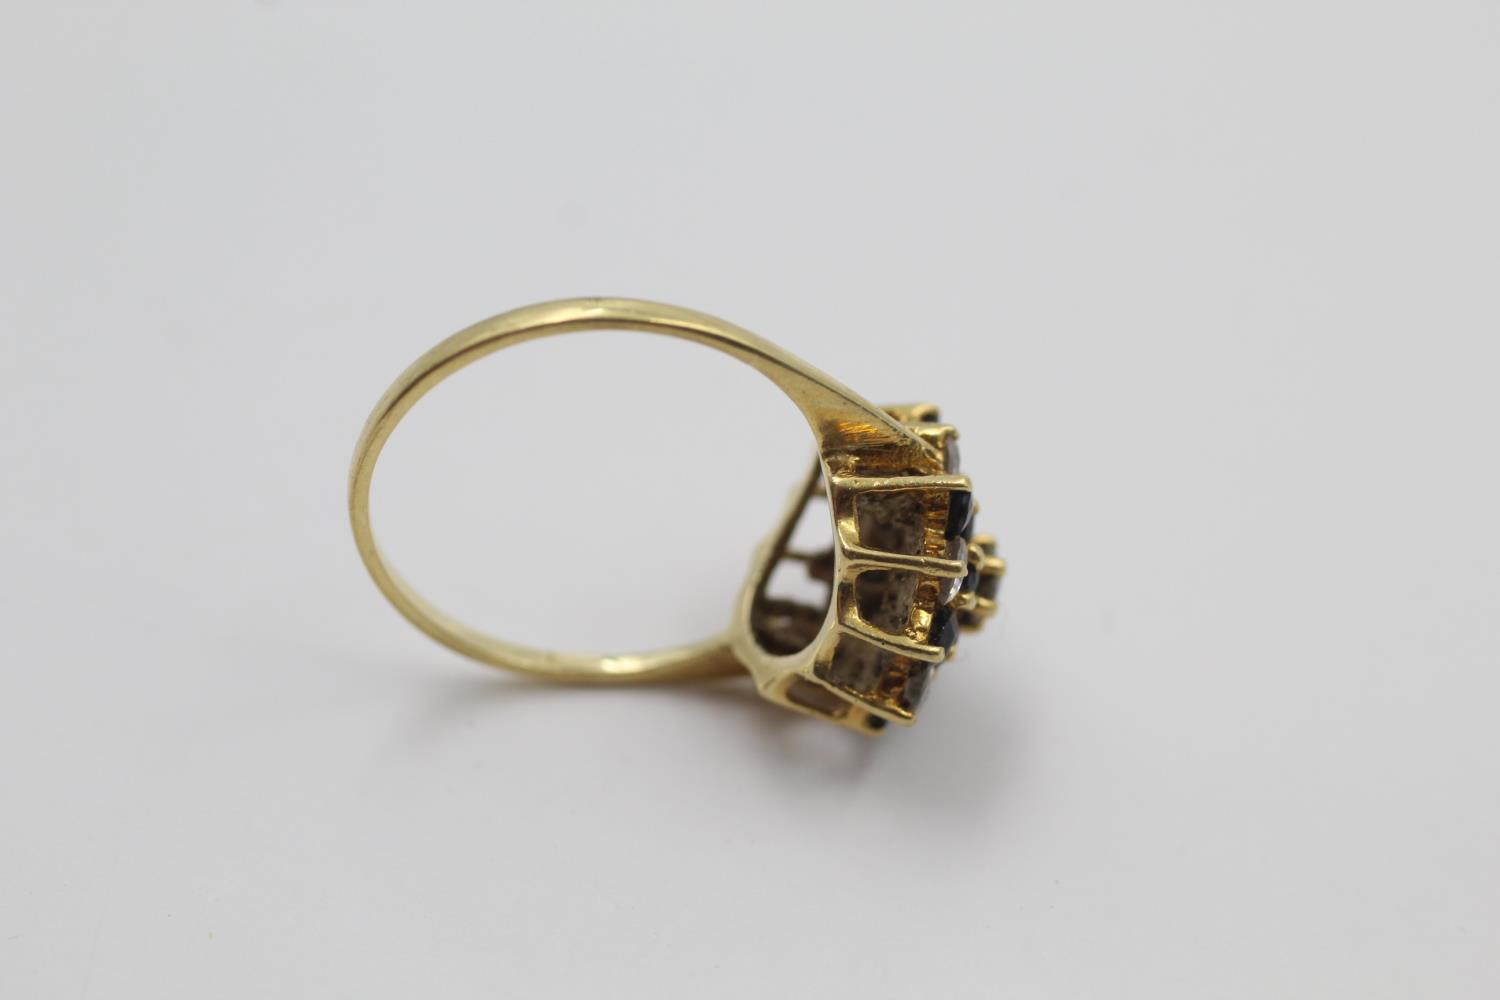 18ct Gold gemstone cluster ring 3.1 grams gross - Image 4 of 4